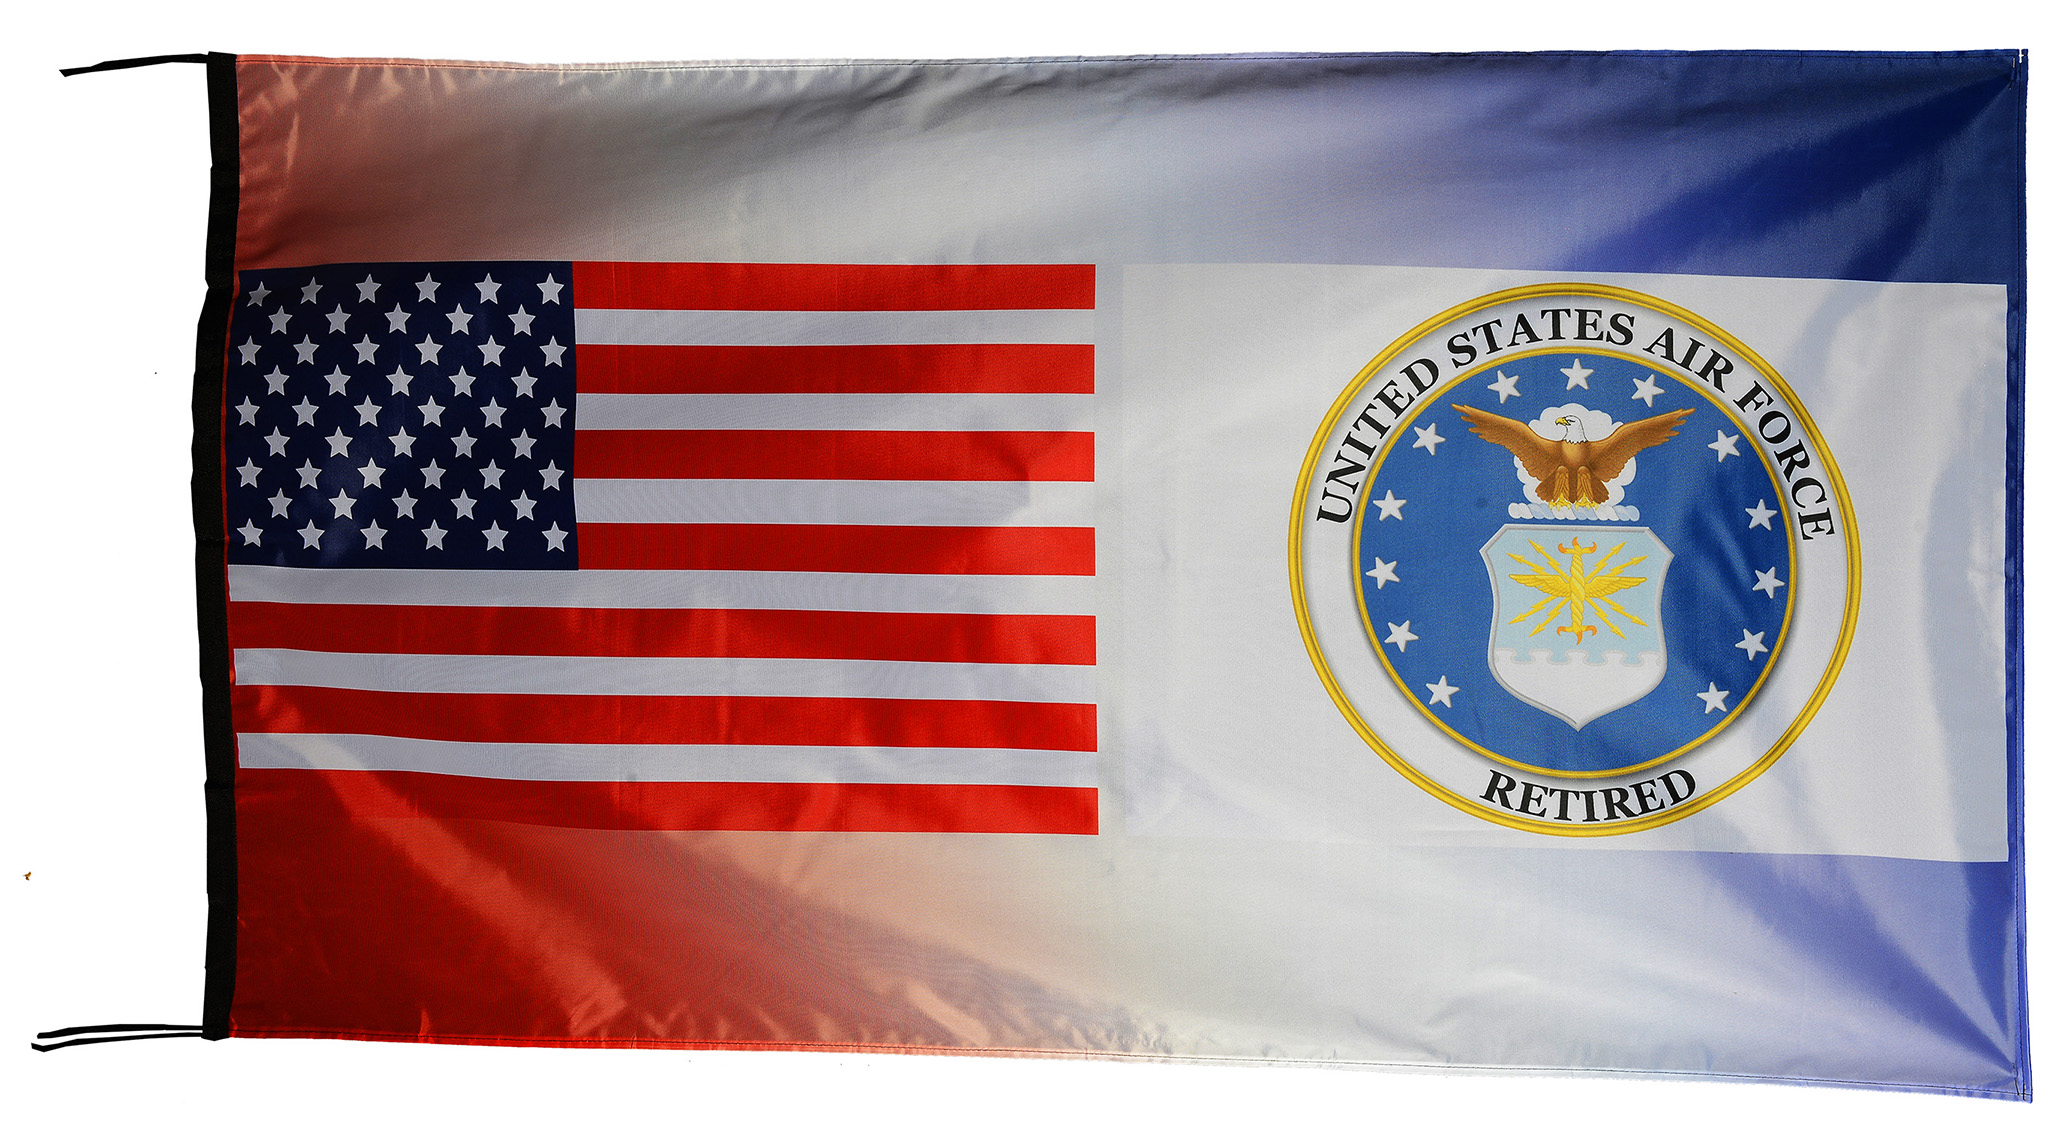 Flag  147 USA / US Country / United States Of America and “US Air Force” (Military Retired) / Patriotic / Pride Hybrid Weather-Resistant Polyester Outdoor Flag Landscape Banner / Vivid Colors / 3 X 5 FT (150 x 90cm) International Flags for Sale